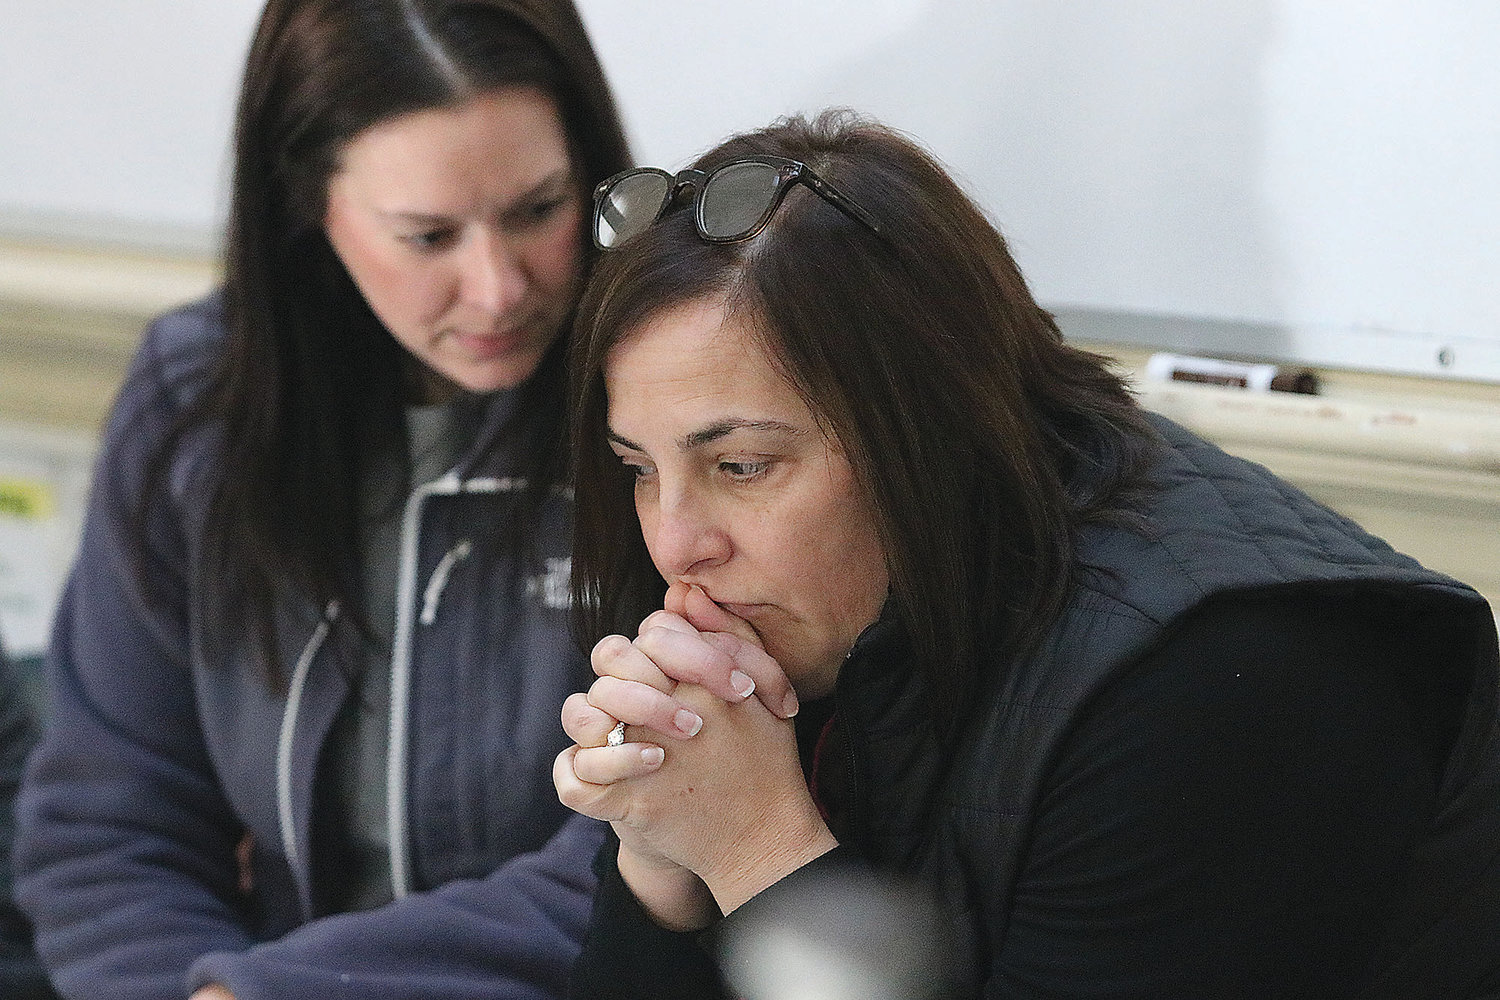 Colt Andrews fourth-grade teachers Jennifer Cotoia (left) and Lori Albuquerque nervously wait and listen for gun shots and banging on classroom doors as an active shooter roams the hallways during a training last Thursday.